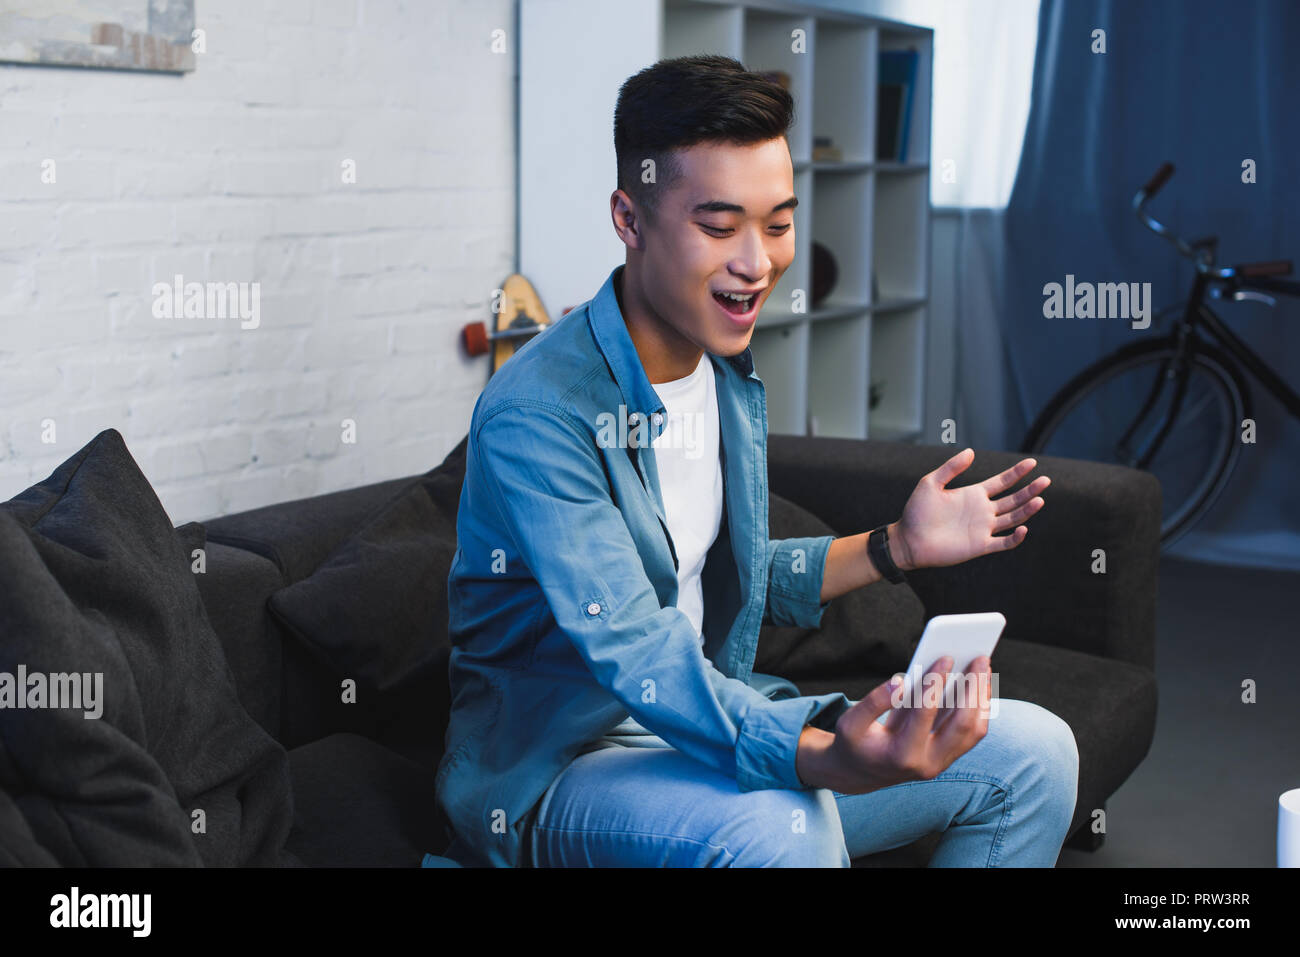 smiling young asian man sitting on couch and using smartphone at home Stock Photo